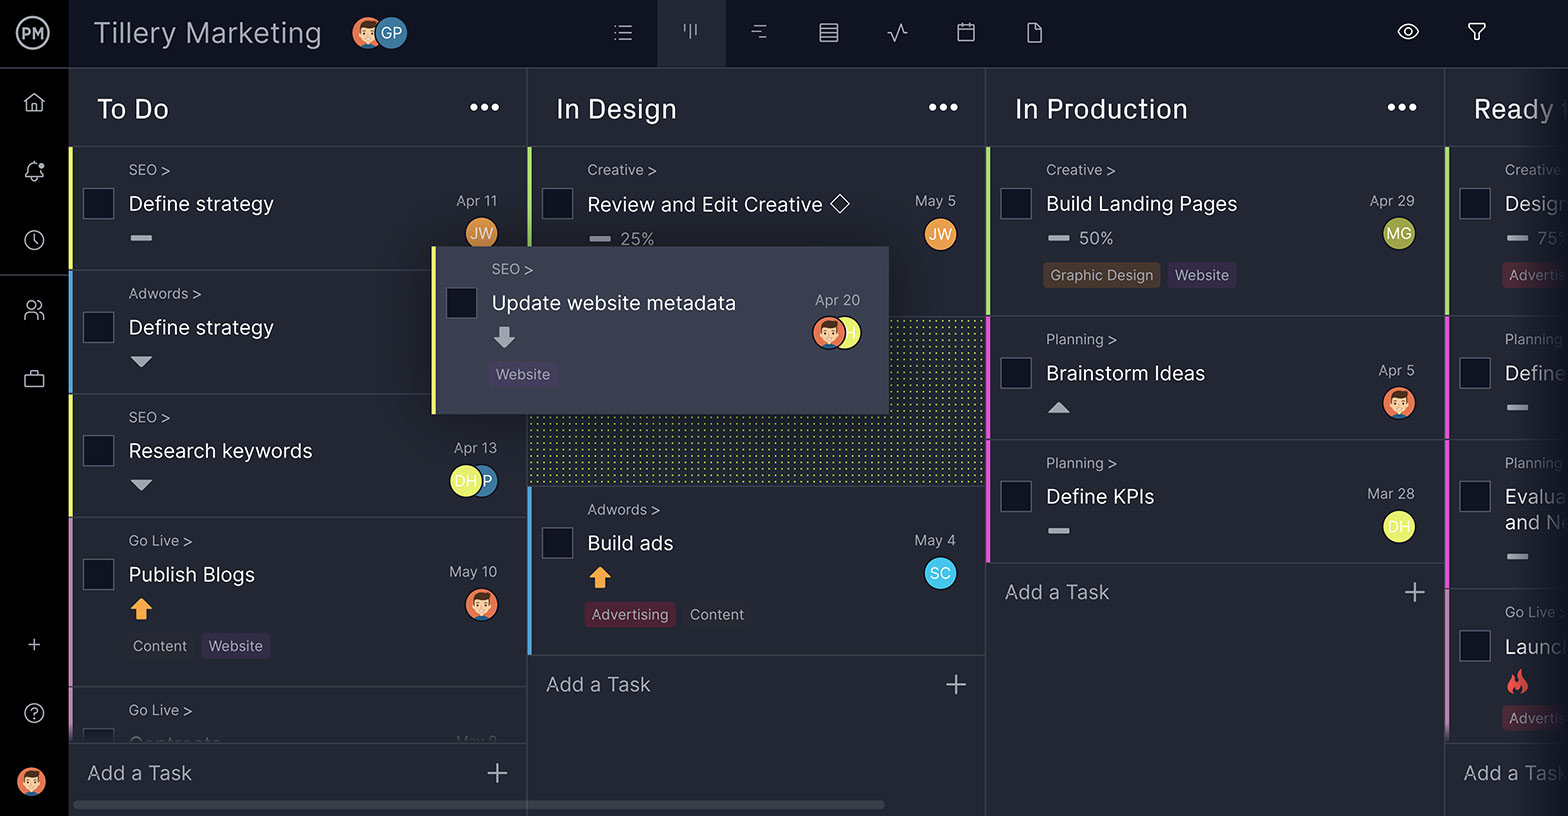 ProjectManager's kanban boards make project management templates come to life